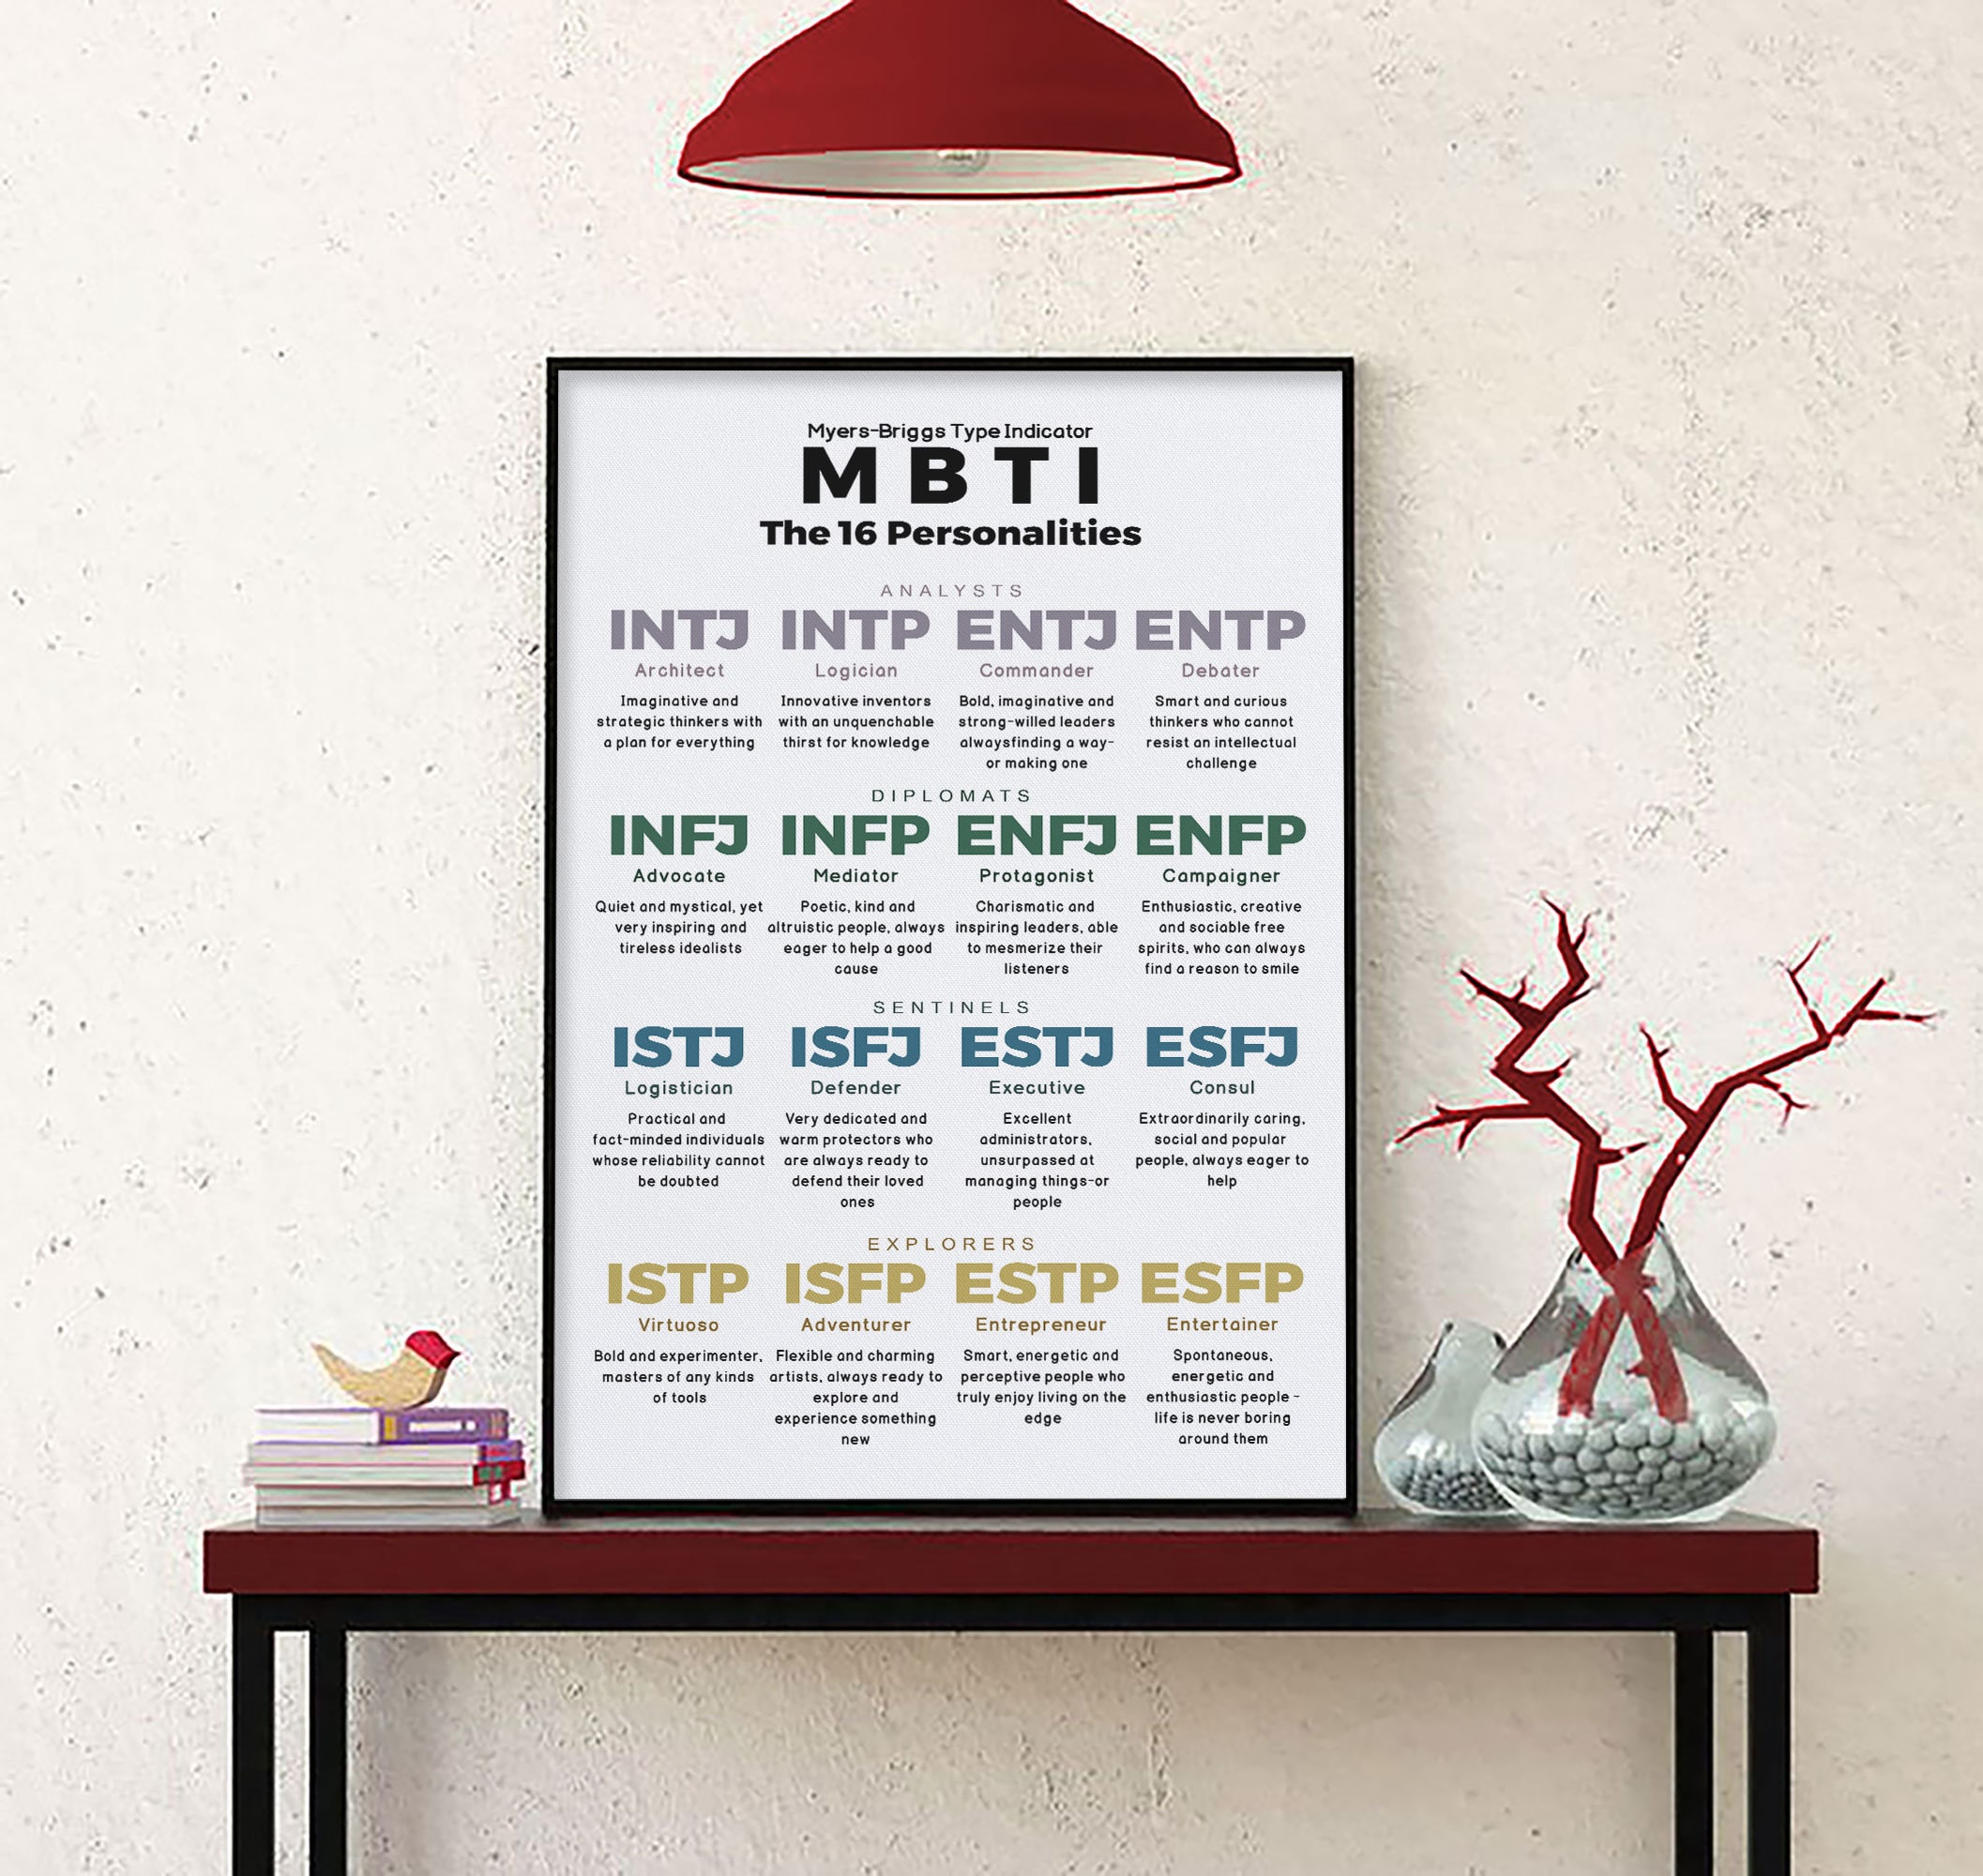 No one makes the perfect leader : r/mbti